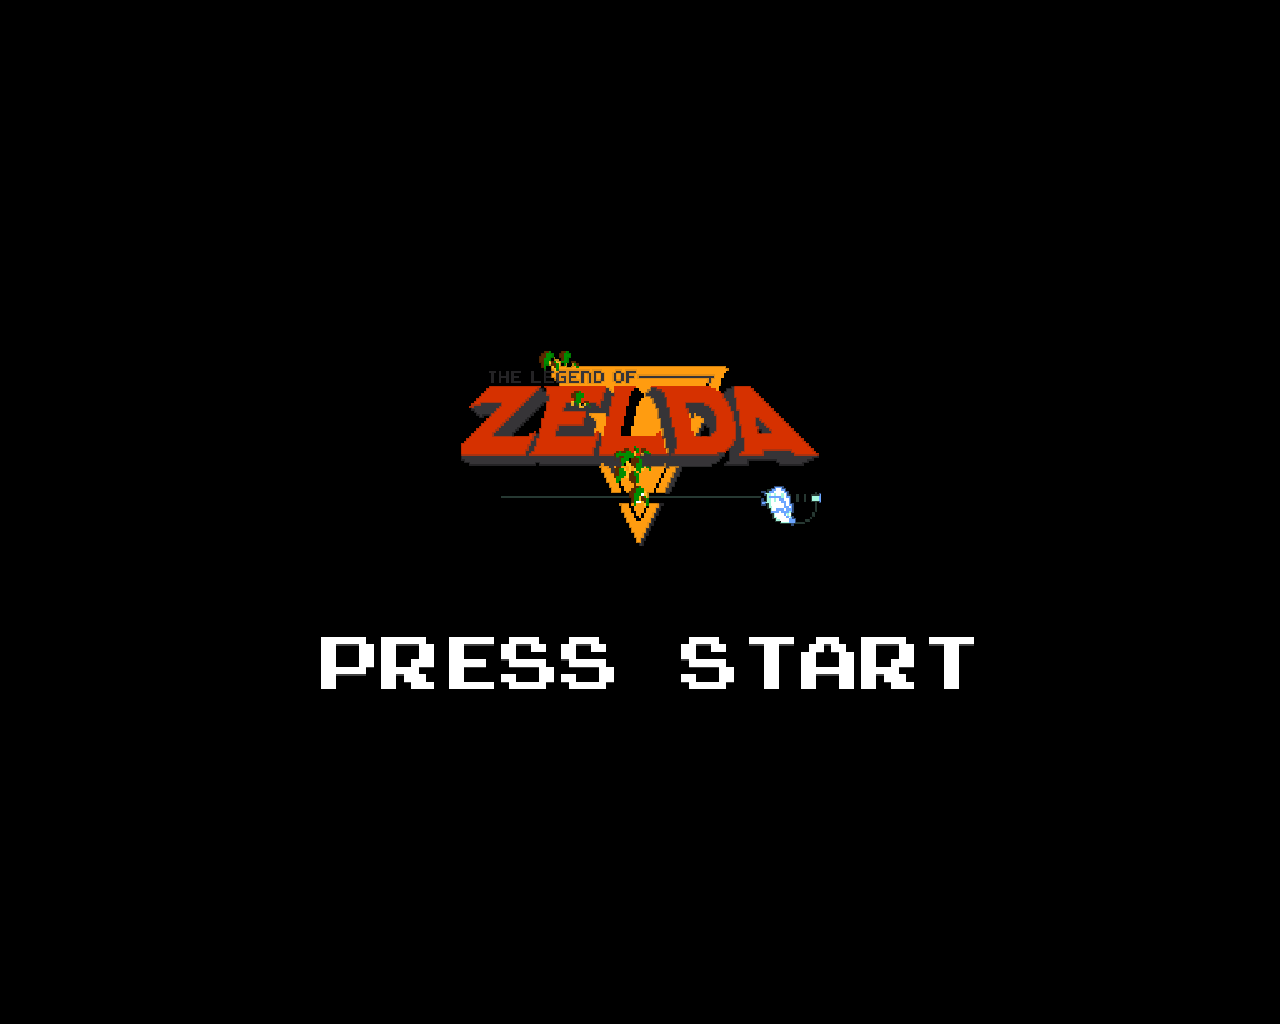 https://cdn.lowgif.com/small/e2f6981acf8ec914-image-detail-for-the-legend-of-zelda-official-wallpapers.gif